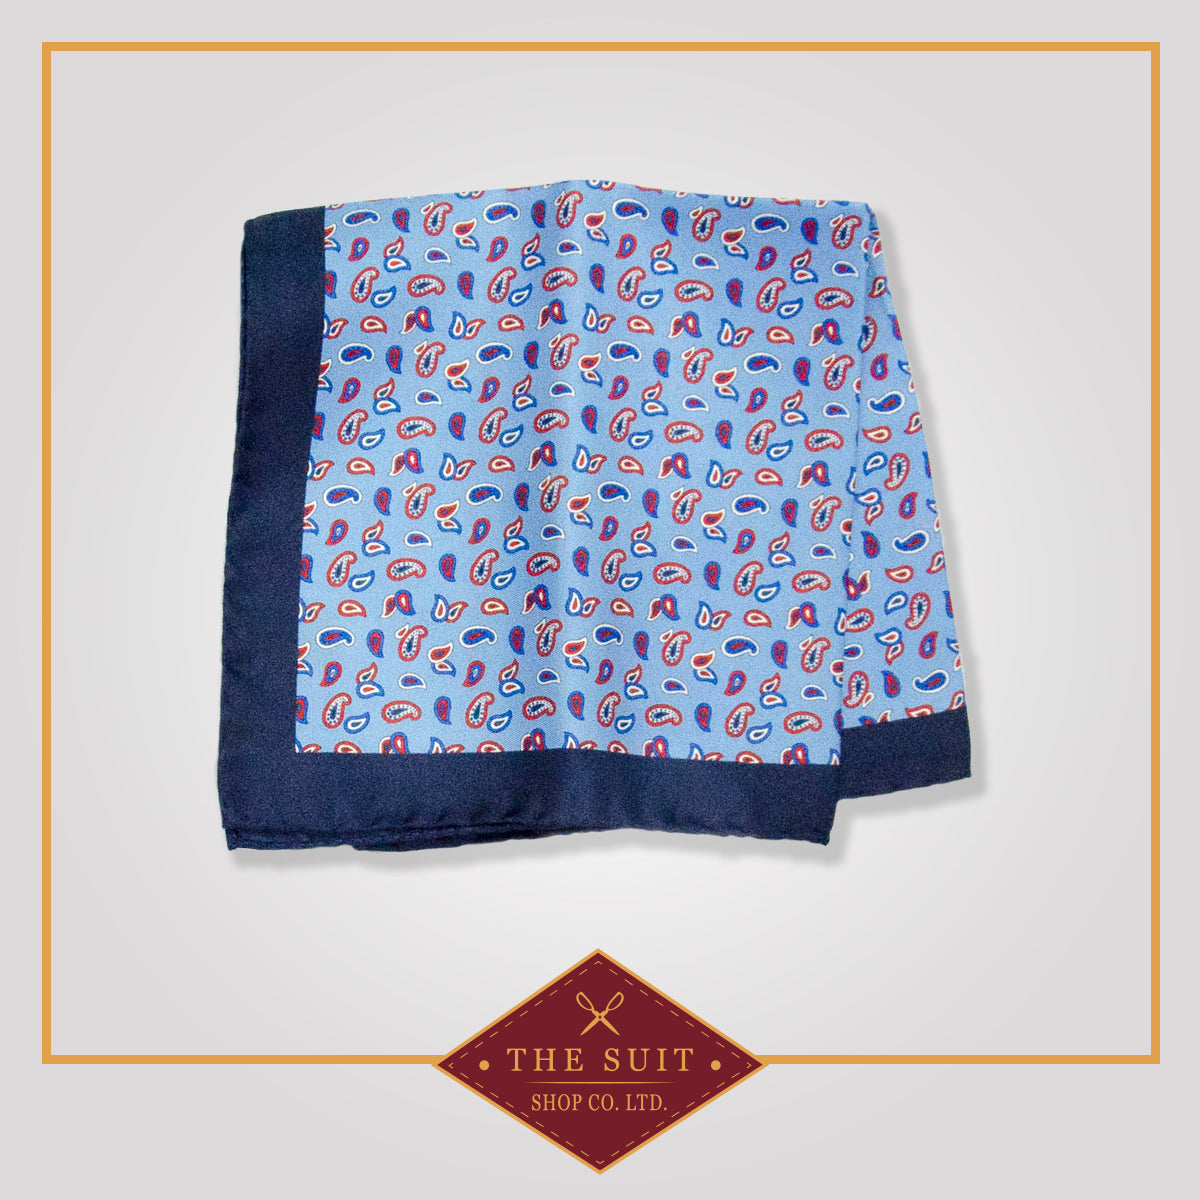 Rhino and Jordy Blue Patterned Pocket Square